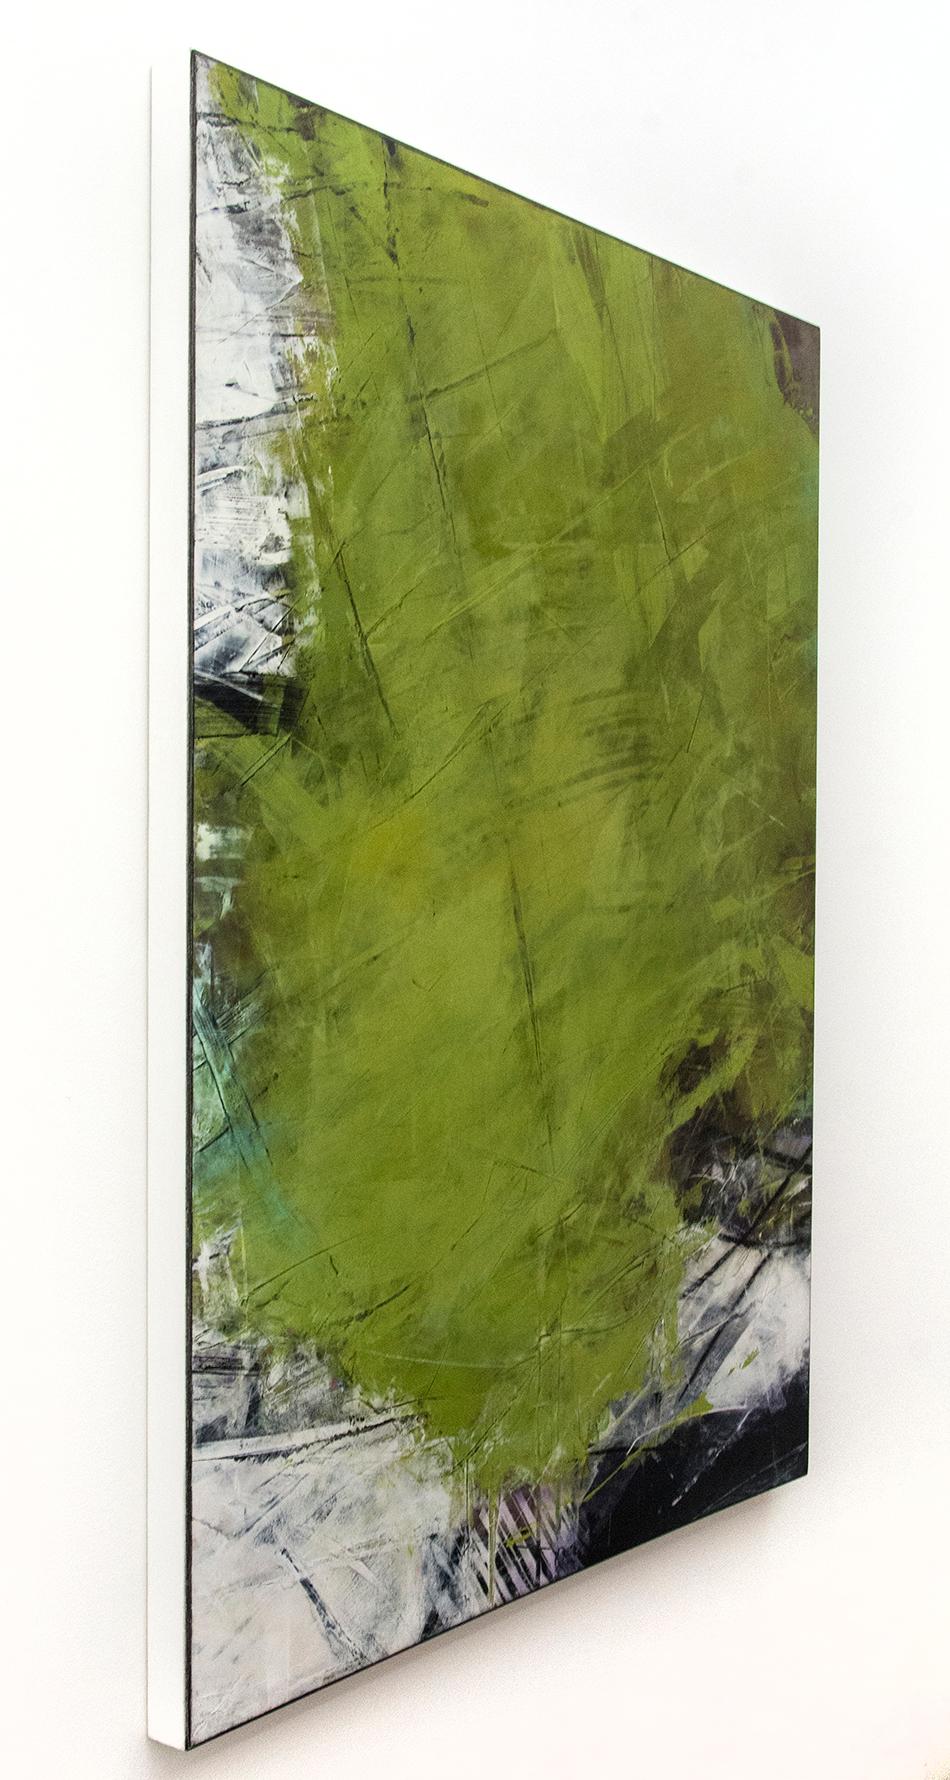 This dynamic abstract composition in spring green, black and white by Ivo Stoyanov is a mixed media work on canvas. Created using crushed marble, pigments and wax, the painting has a smooth rich surface. 

The lush, layered and boldly energetic